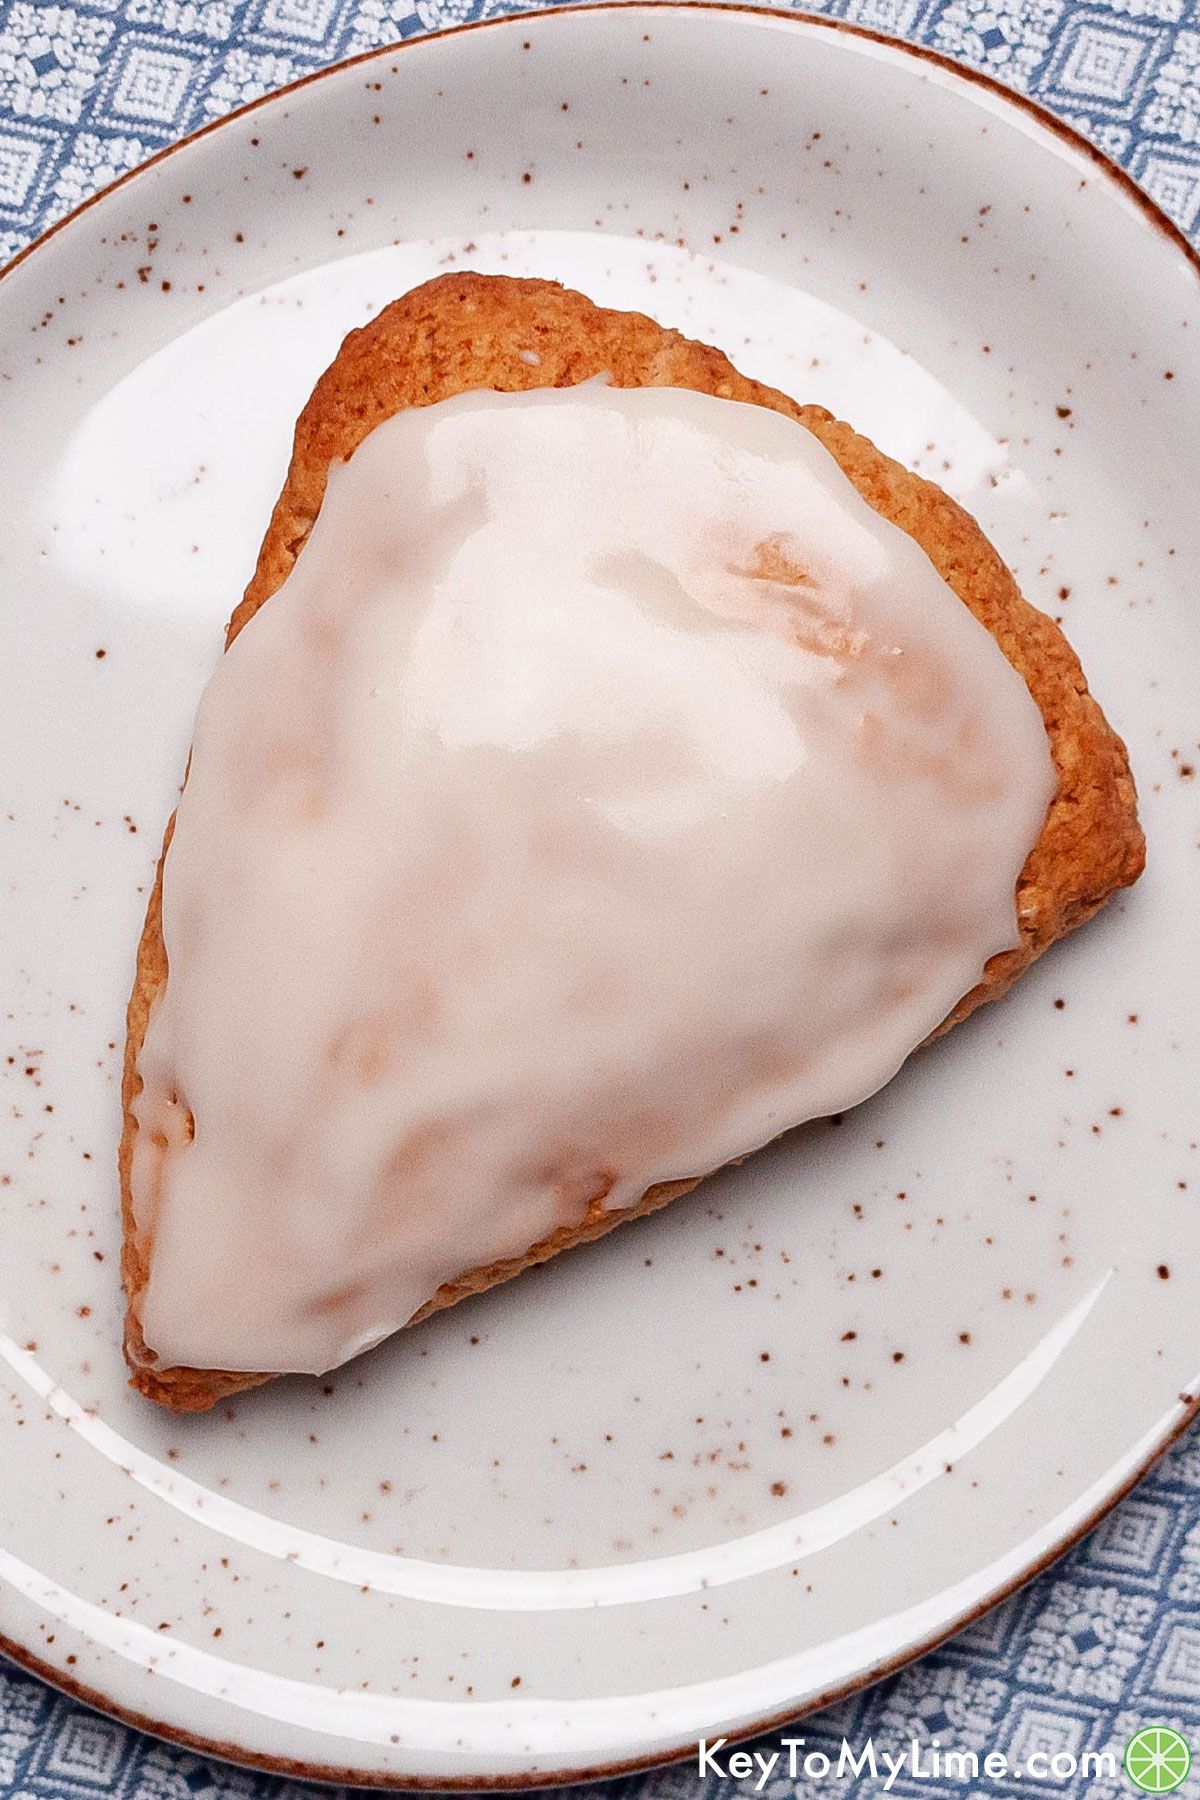 An overhead image of a vanilla glazed Bisquick scone on a plate.